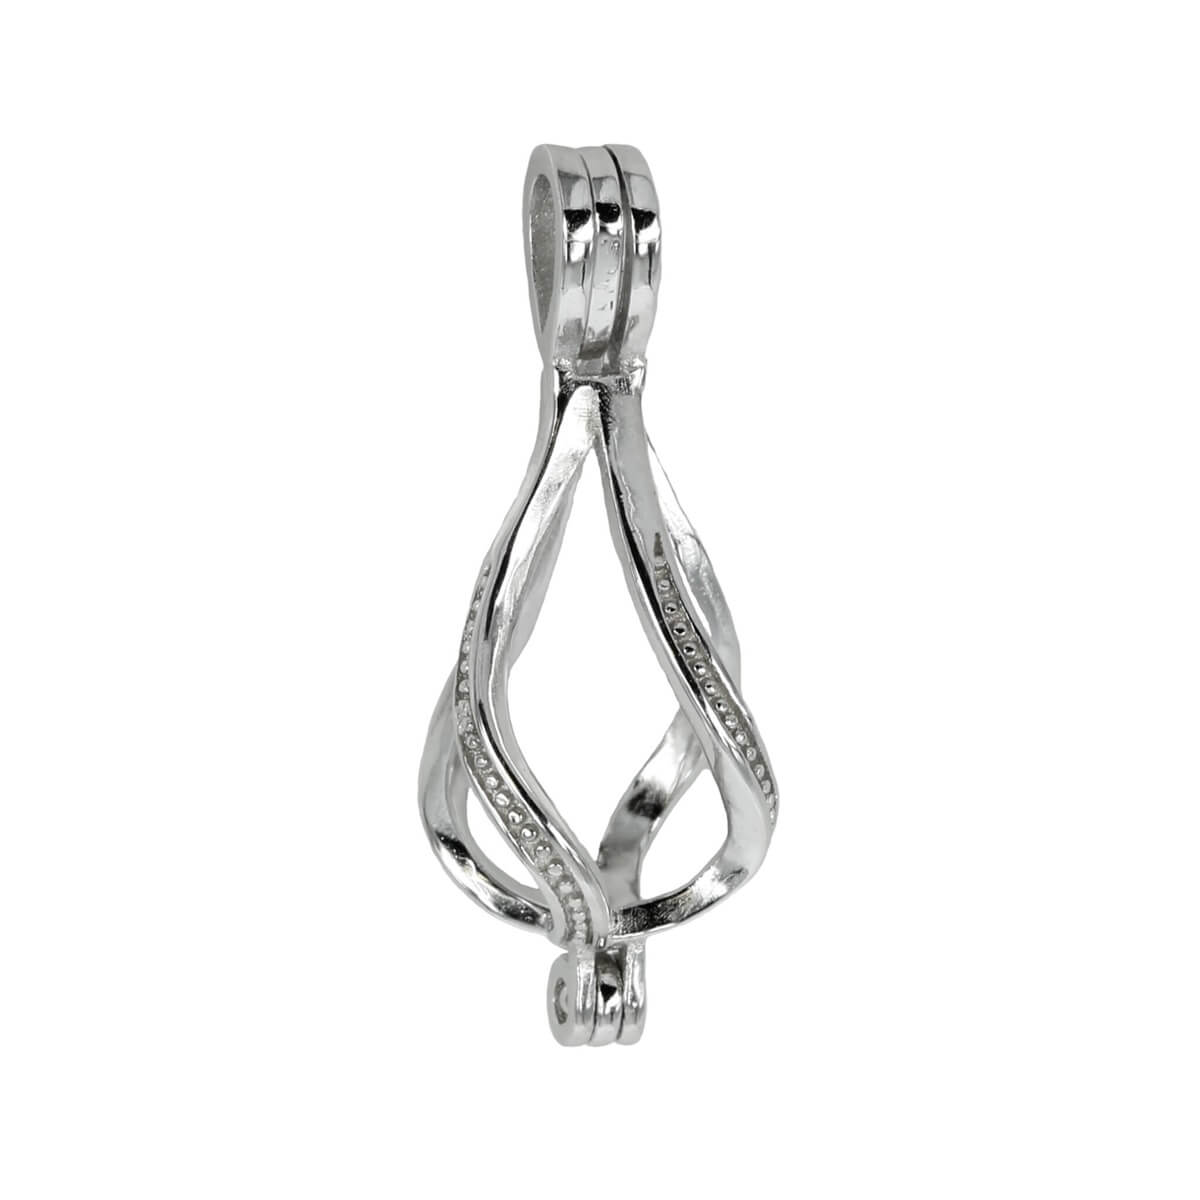 Spiral Pear Shape Cage Pendant with Incorporated Bail in Sterling Silver 8mm 